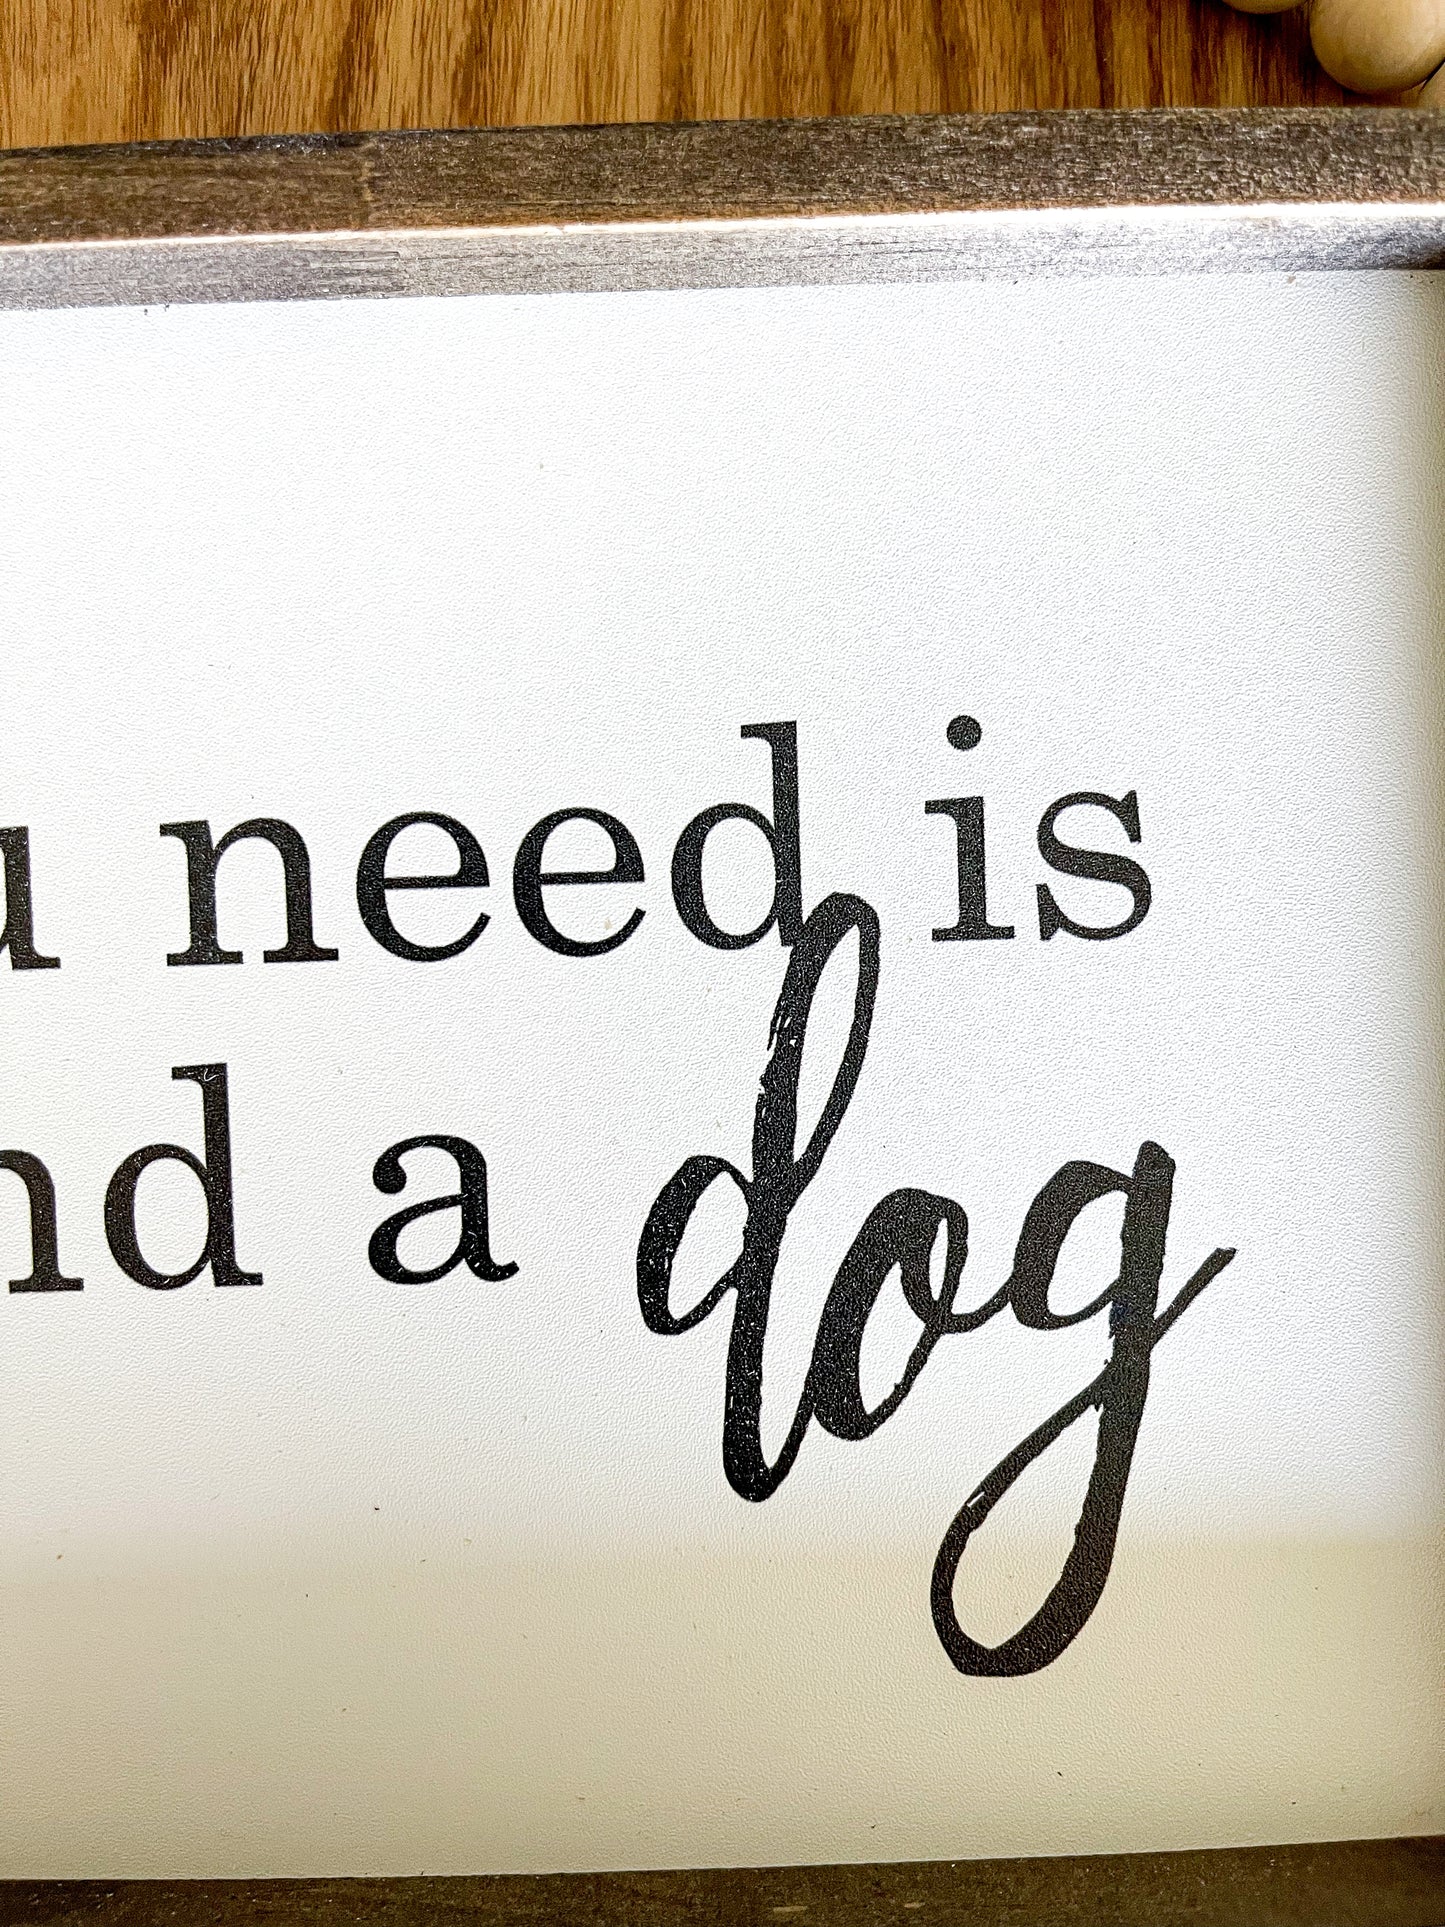 All you need is love and a dog